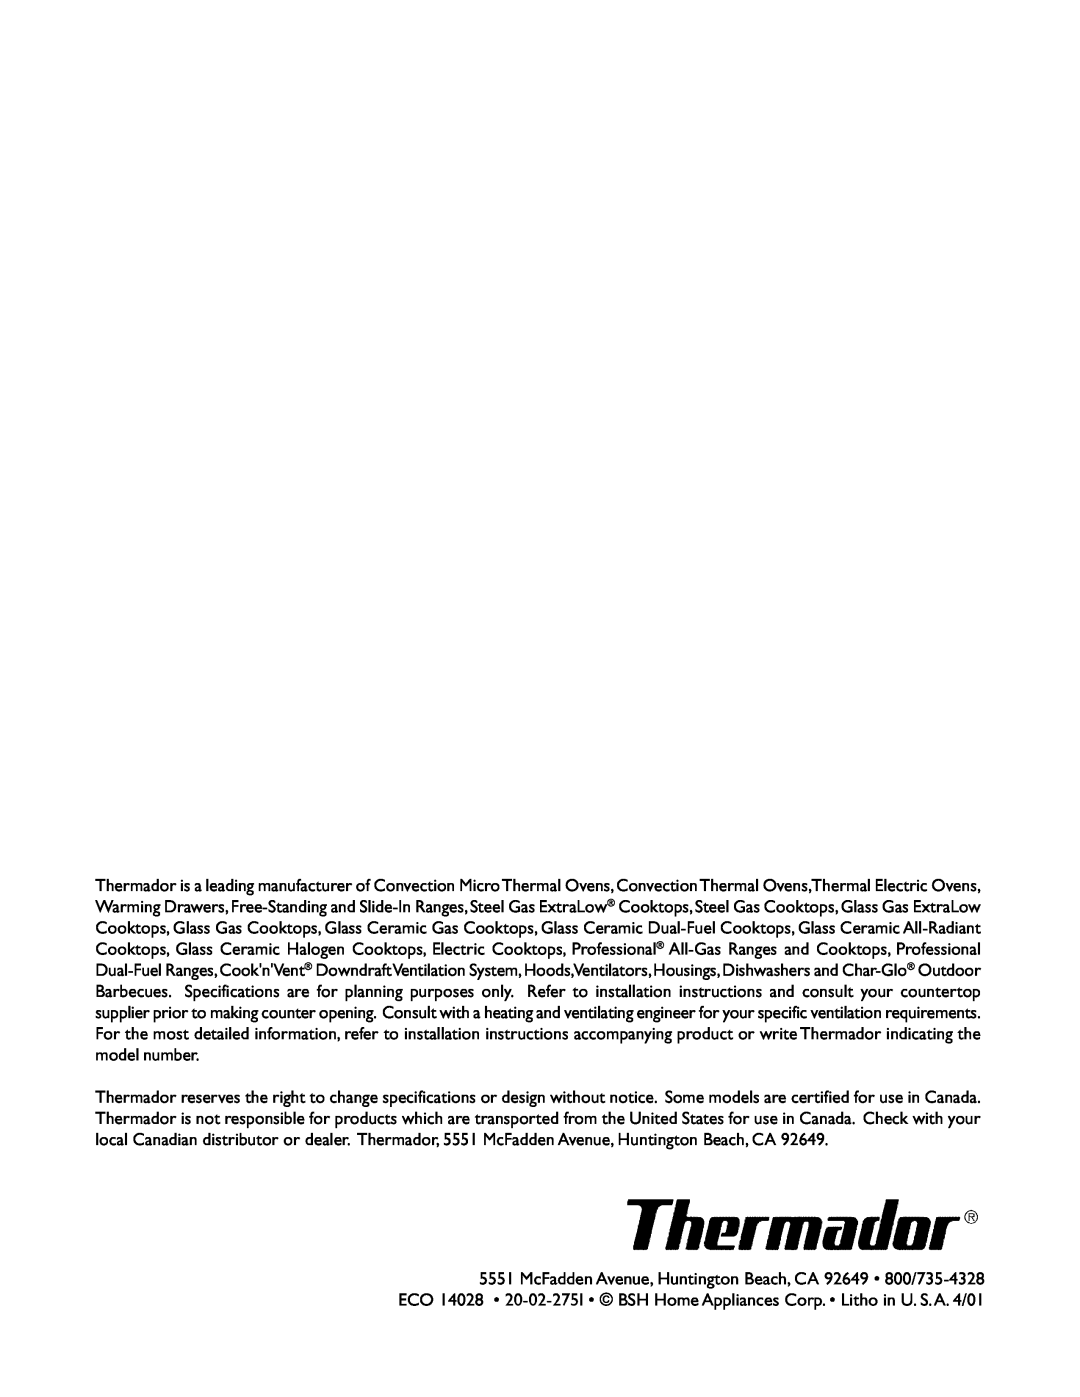 Thermador GGS30, SGS36G, SGS30, SGN36G, SGN30, GGN30, GGN365, GGS365 instruction manual 